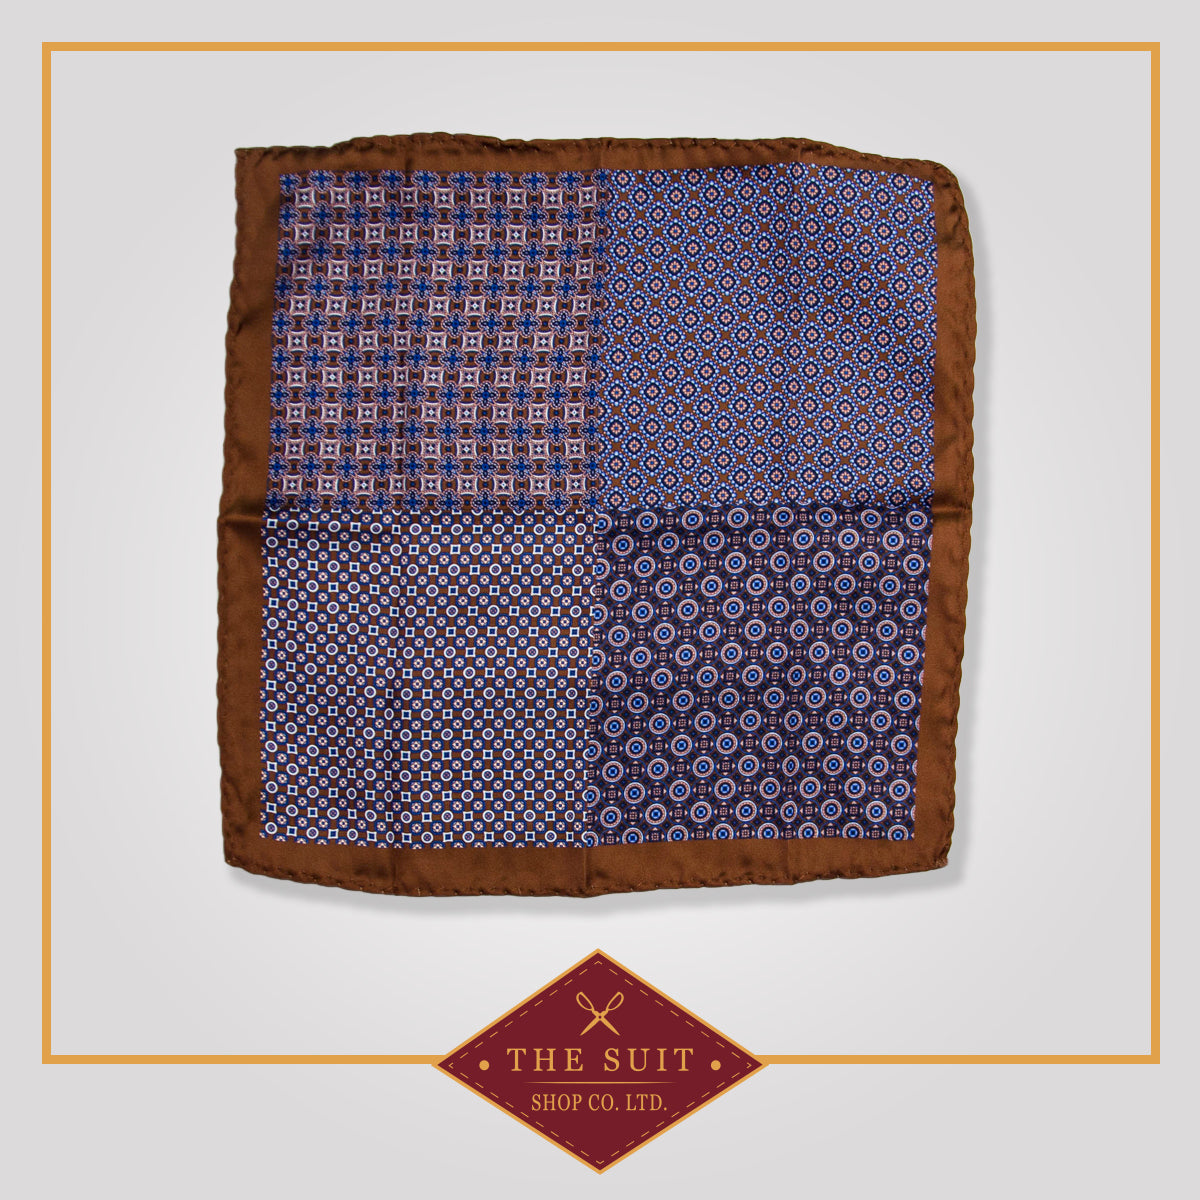 Sepia and Matterhorn Patterned Pocket Square